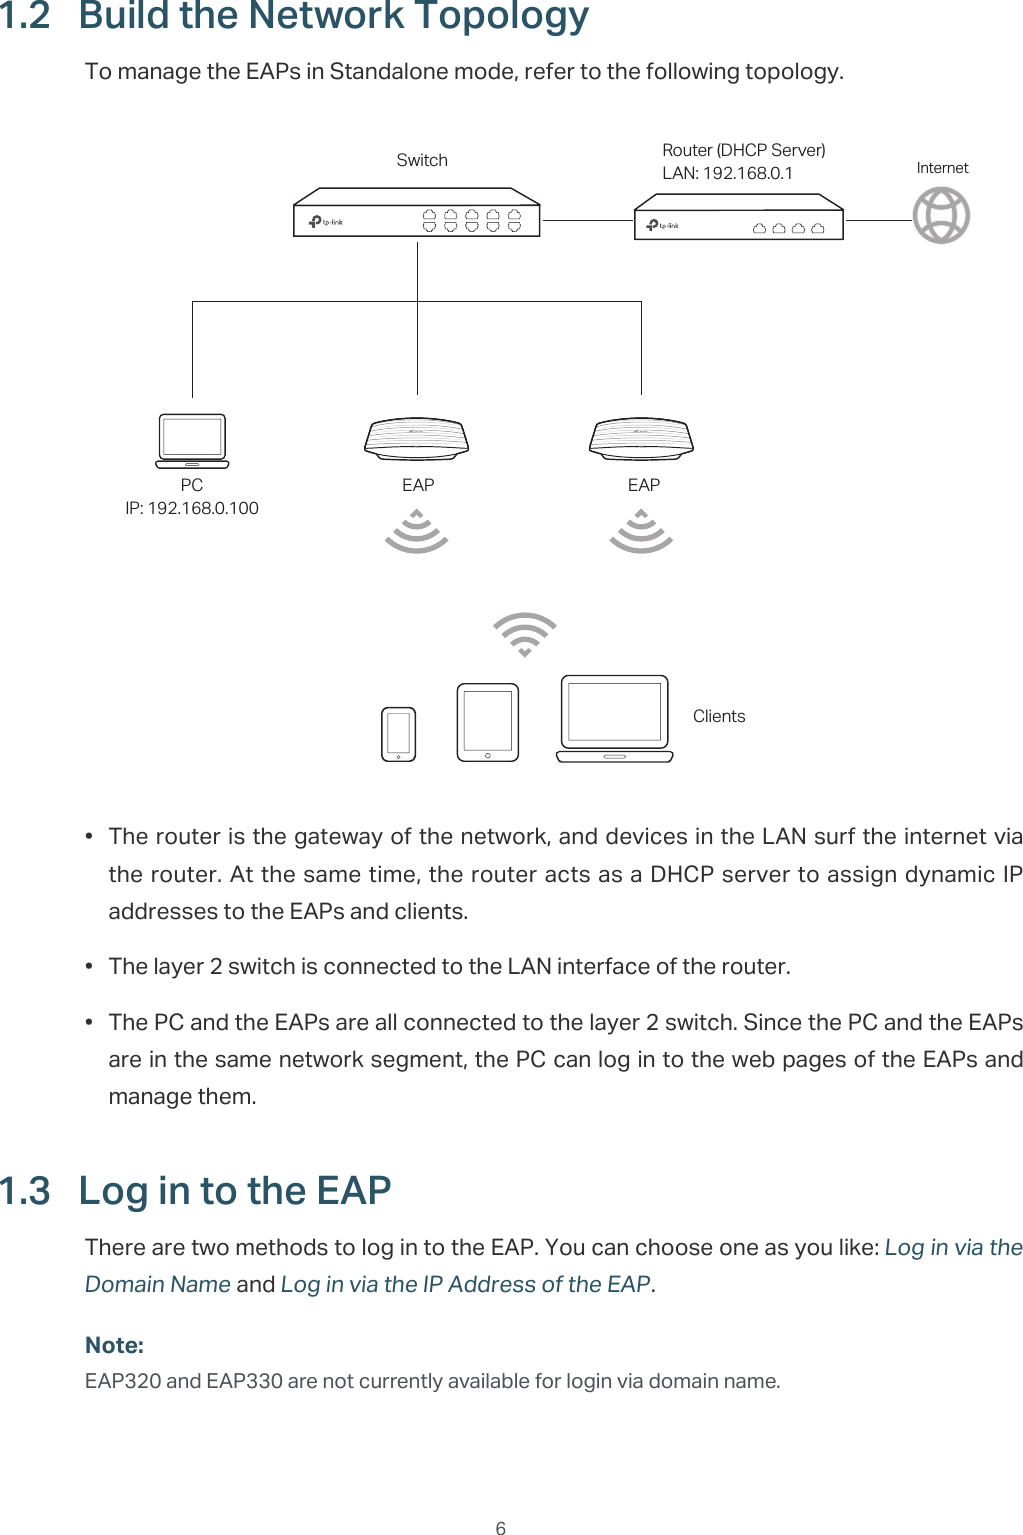  61.2  Build the Network TopologyTo manage the EAPs in Standalone mode, refer to the following topology.EAPEAPPCIP: 192.168.0.100Switch Router (DHCP Server)LAN: 192.168.0.1 InternetClients•  The router is the gateway of the network, and devices in the LAN surf the internet via the router. At the same time, the router acts as a DHCP server to assign dynamic IP addresses to the EAPs and clients.•  The layer 2 switch is connected to the LAN interface of the router.•  The PC and the EAPs are all connected to the layer 2 switch. Since the PC and the EAPs are in the same network segment, the PC can log in to the web pages of the EAPs and manage them.1.3  Log in to the EAPThere are two methods to log in to the EAP. You can choose one as you like: Log in via the Domain Name and Log in via the IP Address of the EAP.Note:EAP320 and EAP330 are not currently available for login via domain name.